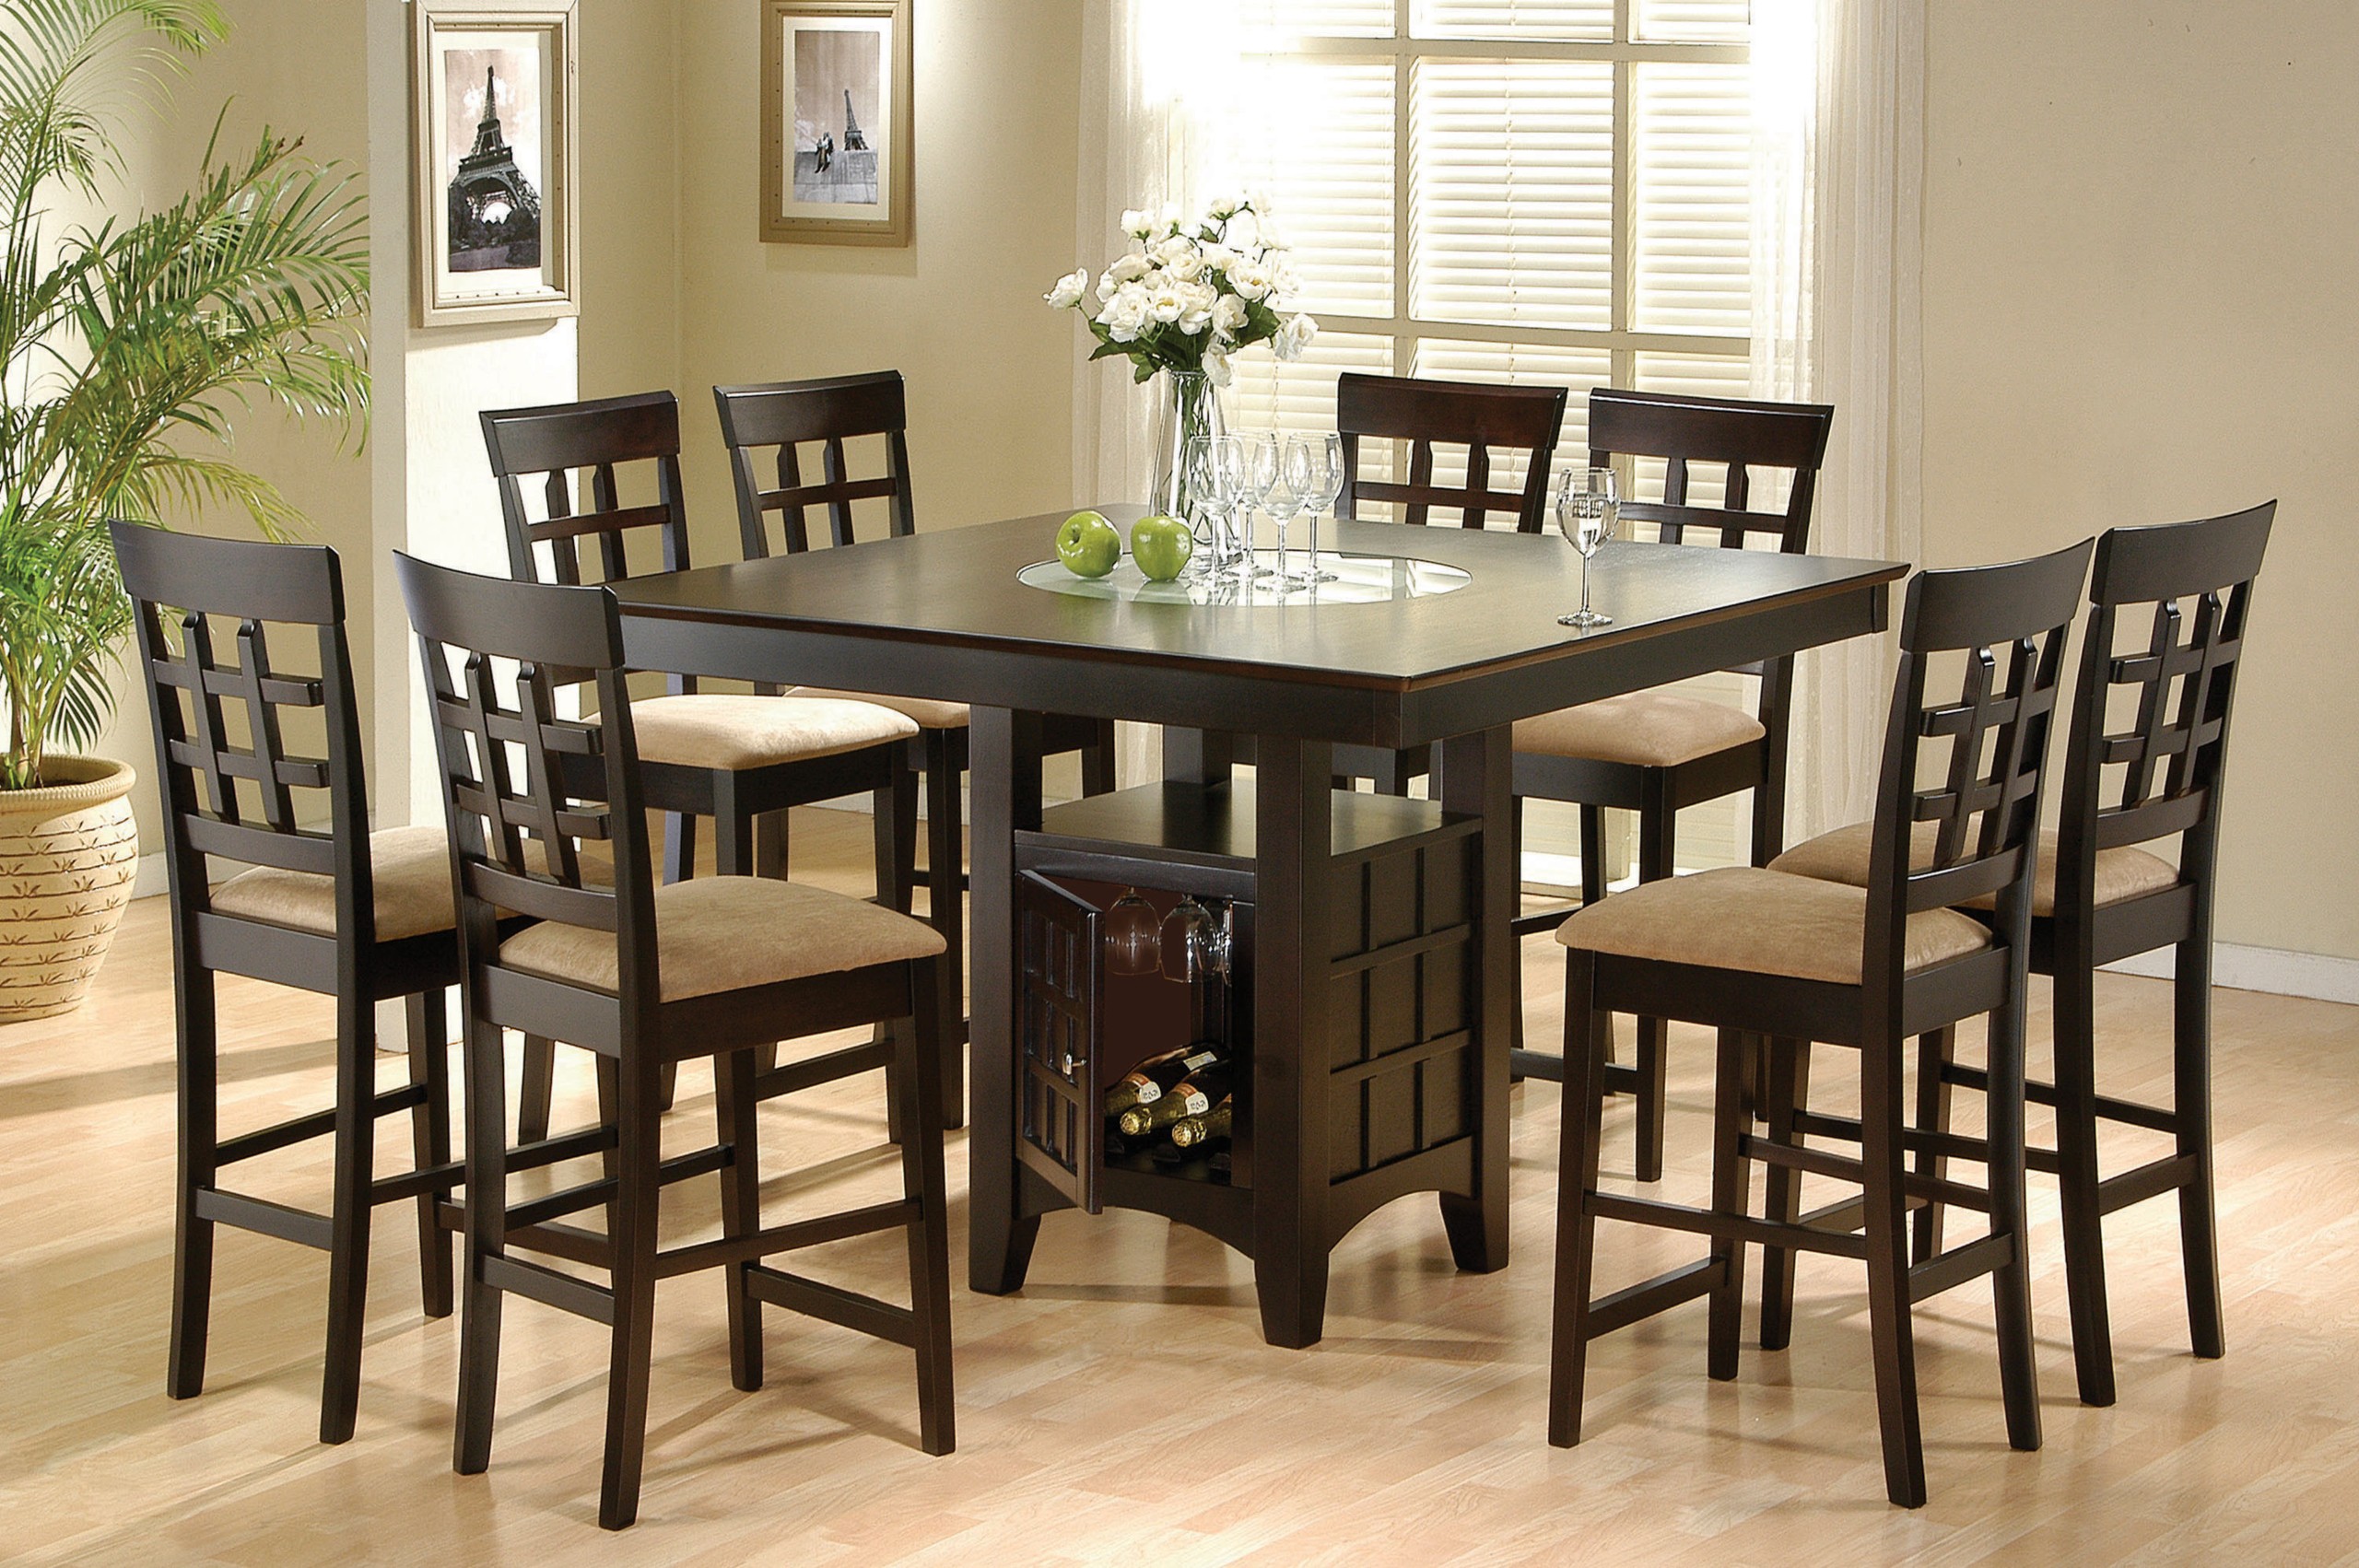 Square 8 seater dining table 4